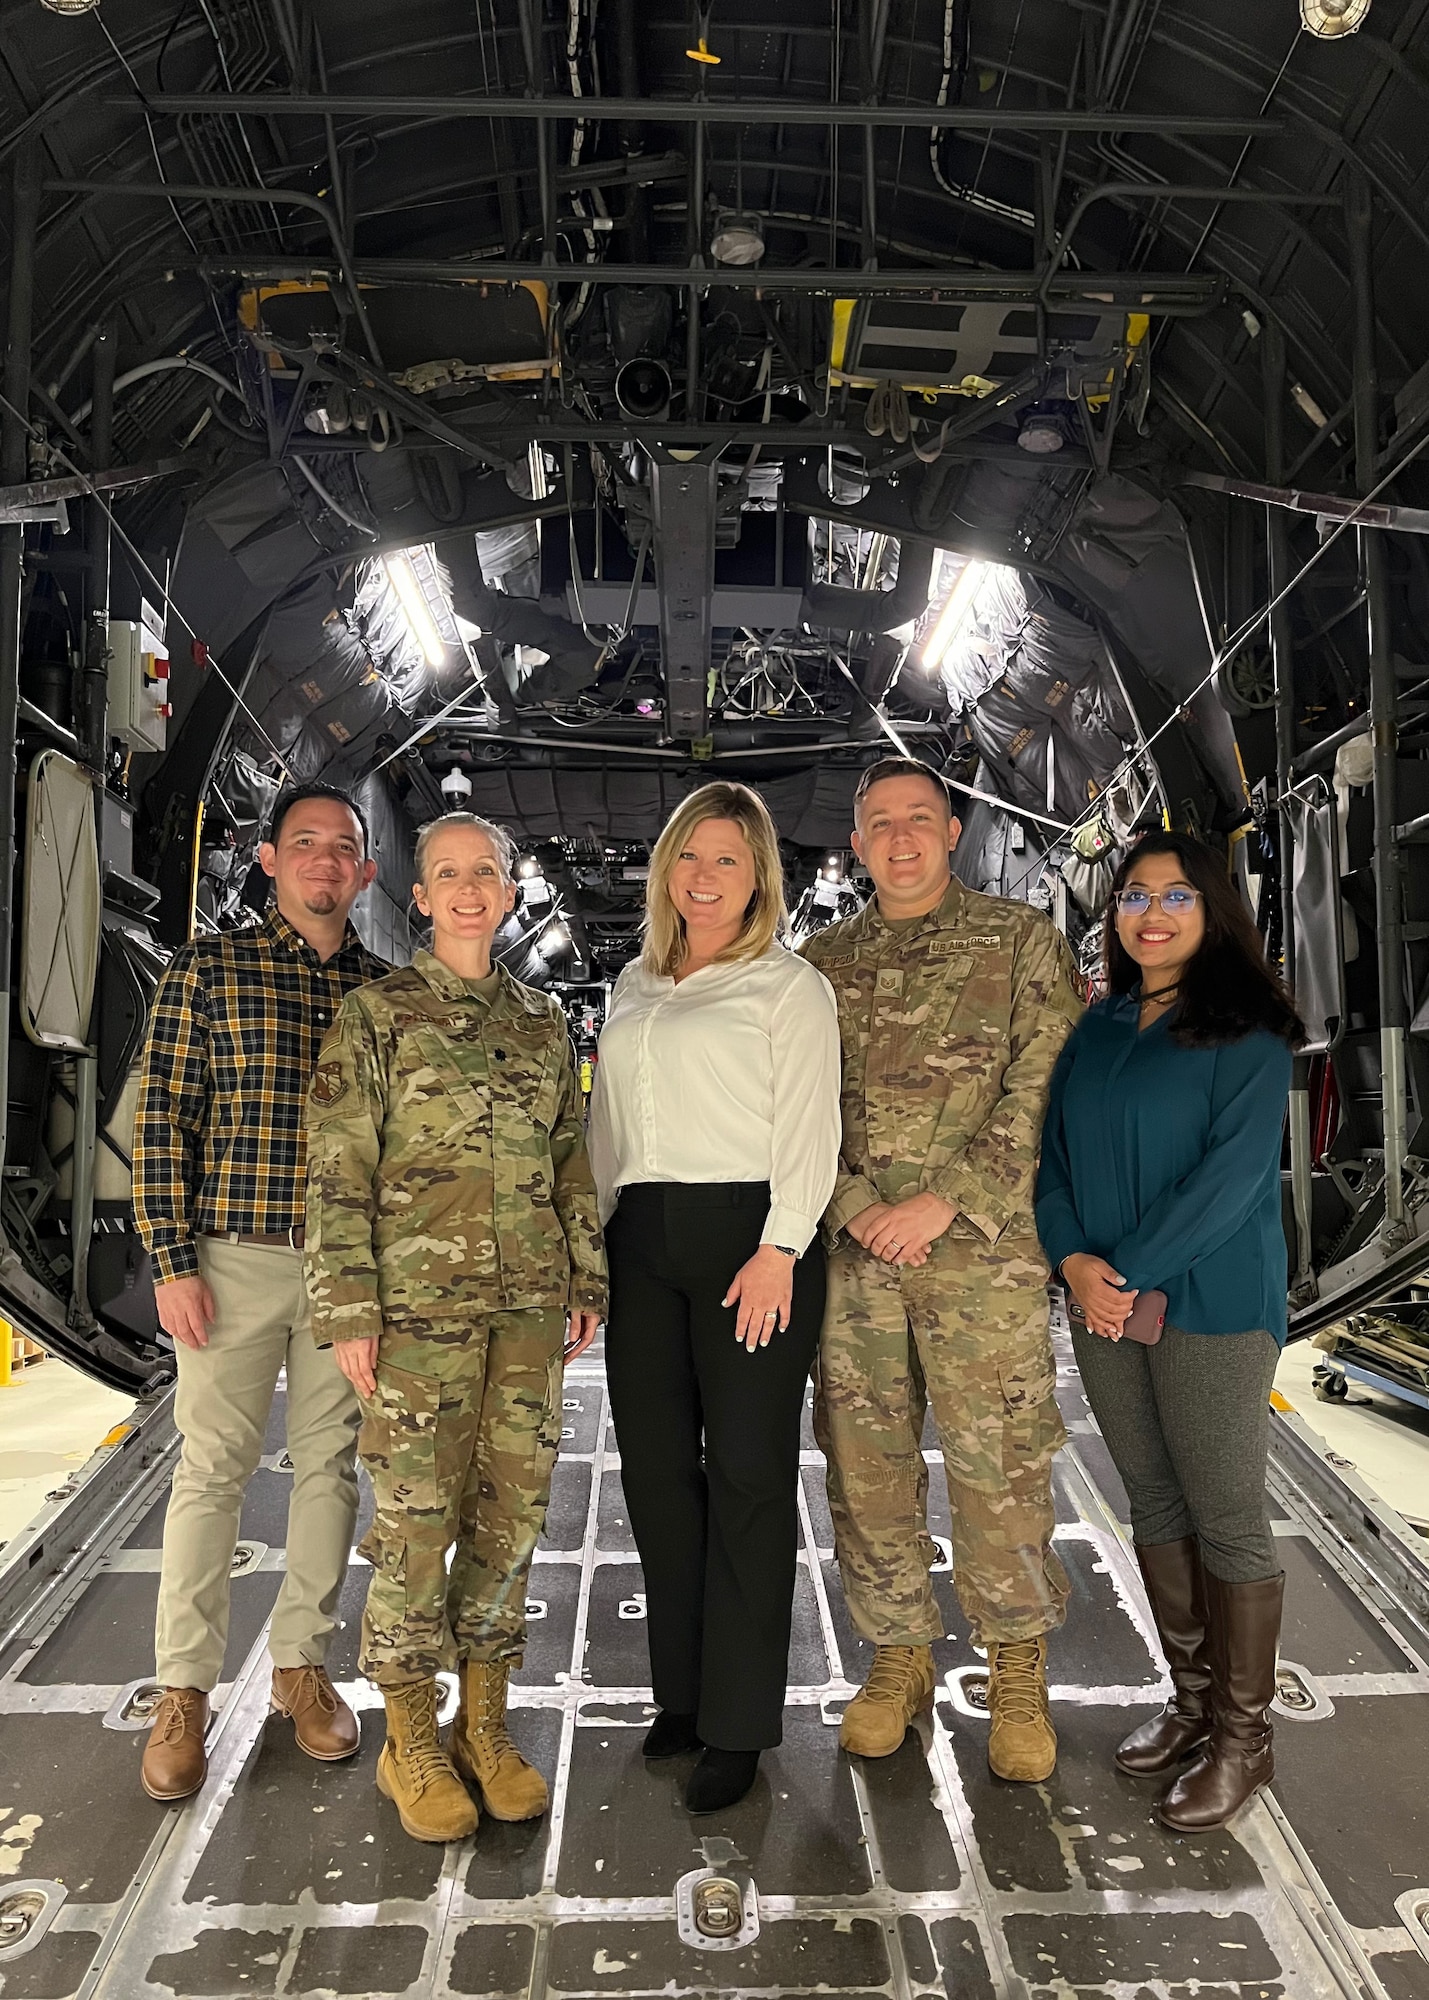 From left: Aeromedical and Operational Clinical Psychology, or AOCP, branch members Dr. Ivan Colin-Rivera, Lt. Col. Kristen Galloway, Dr. Rachael Martinez, Tech. Sgt. Christopher Thompson and Somtirtha Bag at a team event in the U.S. Air Force School of Aerospace Medicine, or USAFSAM, High Bay at Wright-Patterson Air Force Base, Ohio, March 17, 2023. AOCP consults with units across the Air Force to provide evidence-based psychological support for members. AOCP is a branch of USAFSAM, part of the Air Force Research Laboratory’s 711th Human Performance Wing. USAFSAM’s High Bay has multiple aircraft bodies that allow personnel to train for aeromedical evacuation without taking flight. (U.S. Air Force photo / Jeremy Ward)